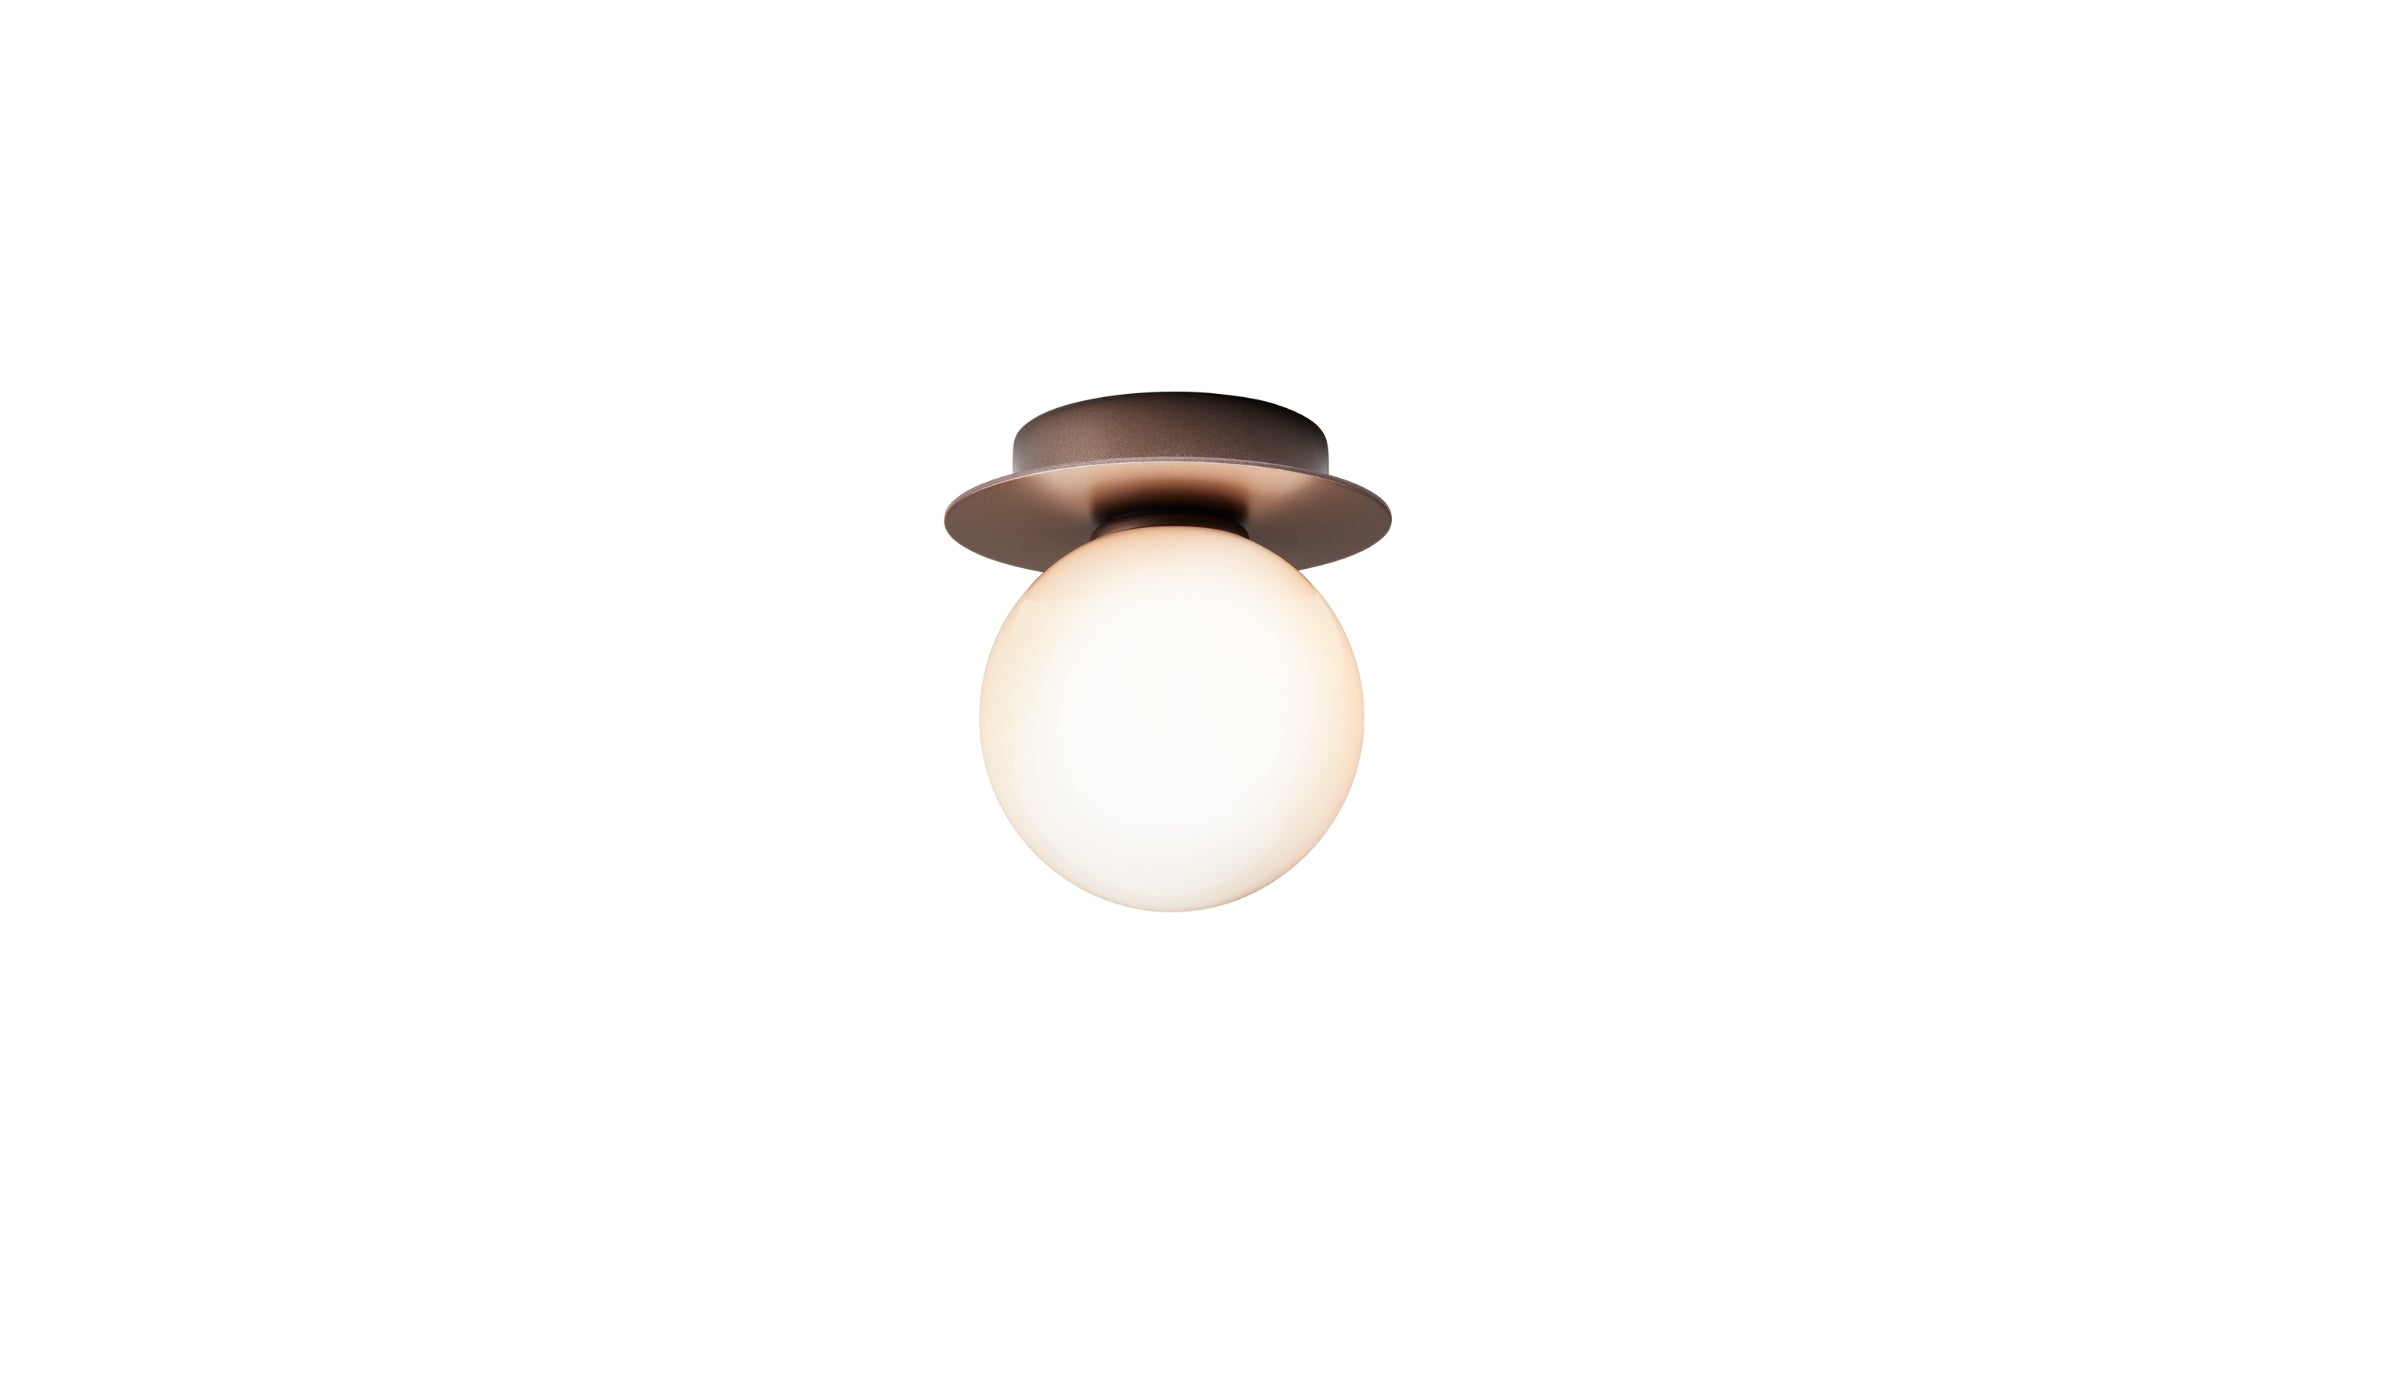 Liila 1 Small - Wall or ceiling light, opal glass lampshade, bronze